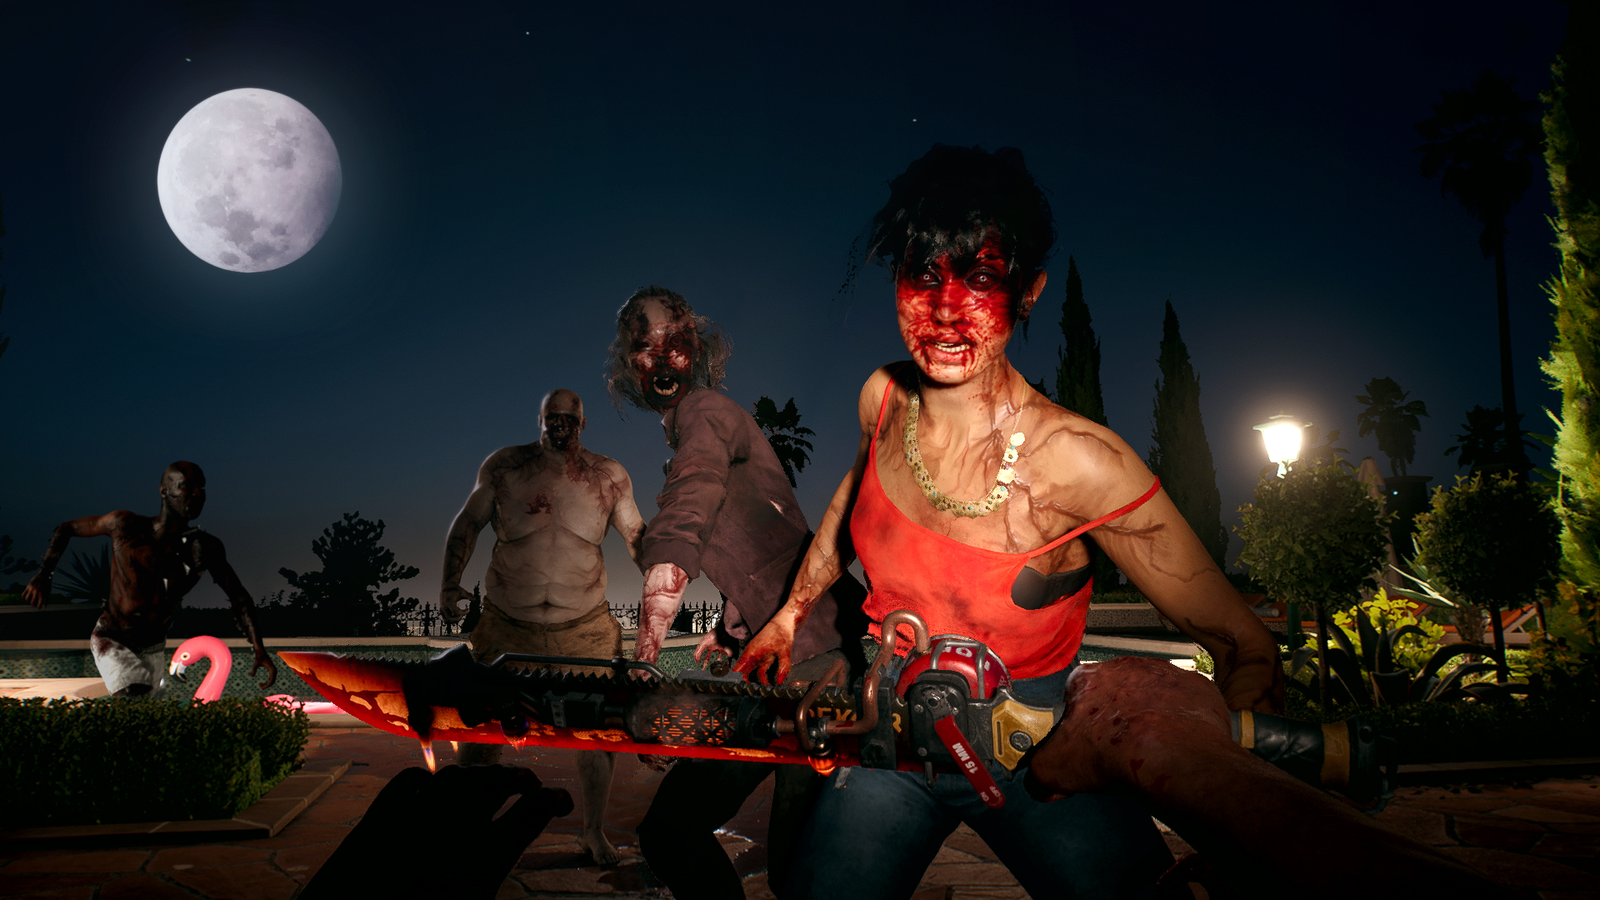 Dead Island 2's first story expansion features a perfectly normal